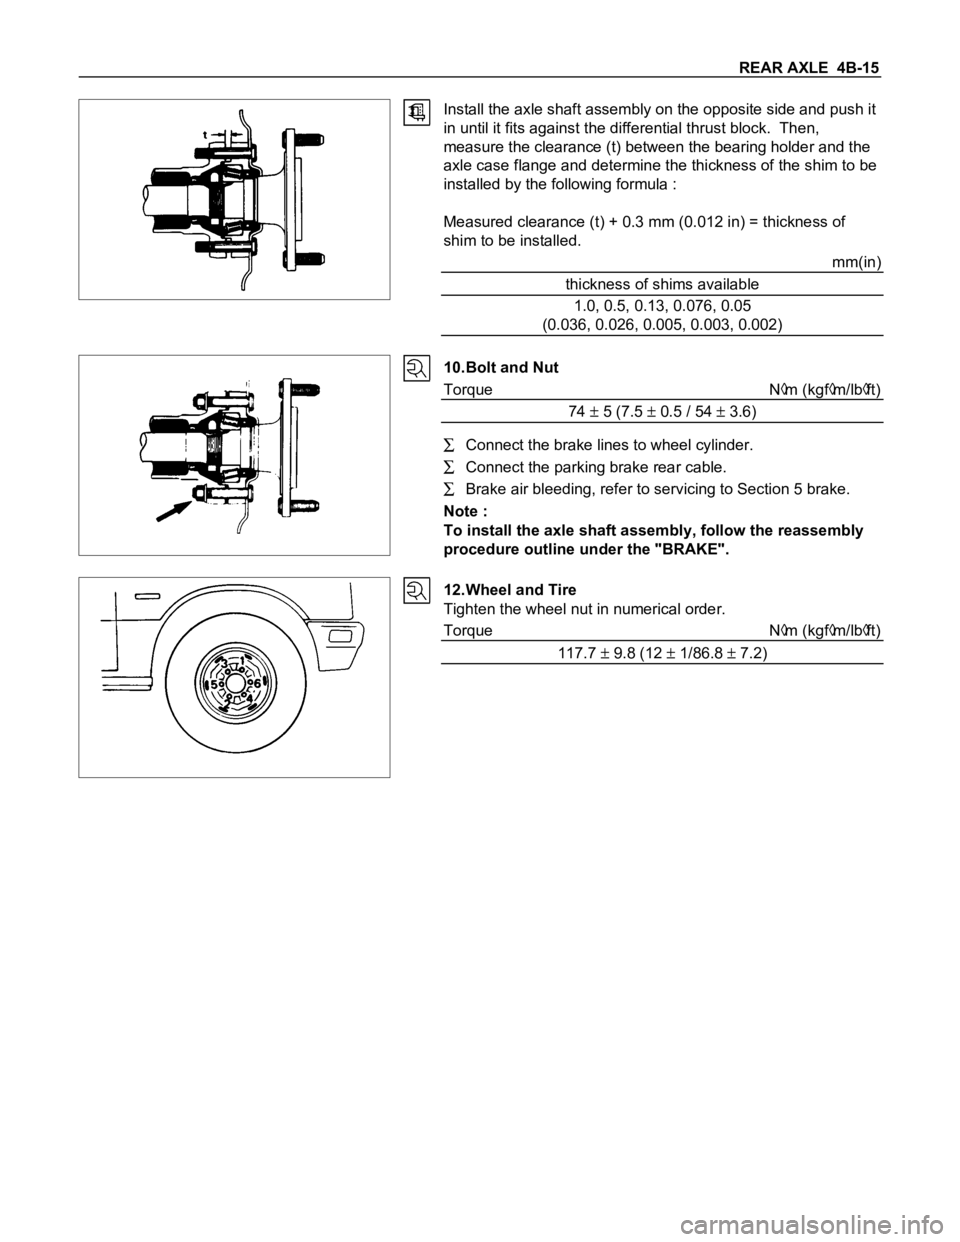 ISUZU TFS SERIES 1997  Workshop Manual REAR AXLE  4B-15
Install the axle shaft assembly on the opposite side and push it
in until it fits against the differential thrust block.  Then,
measure the clearance (t) between the bearing holder an